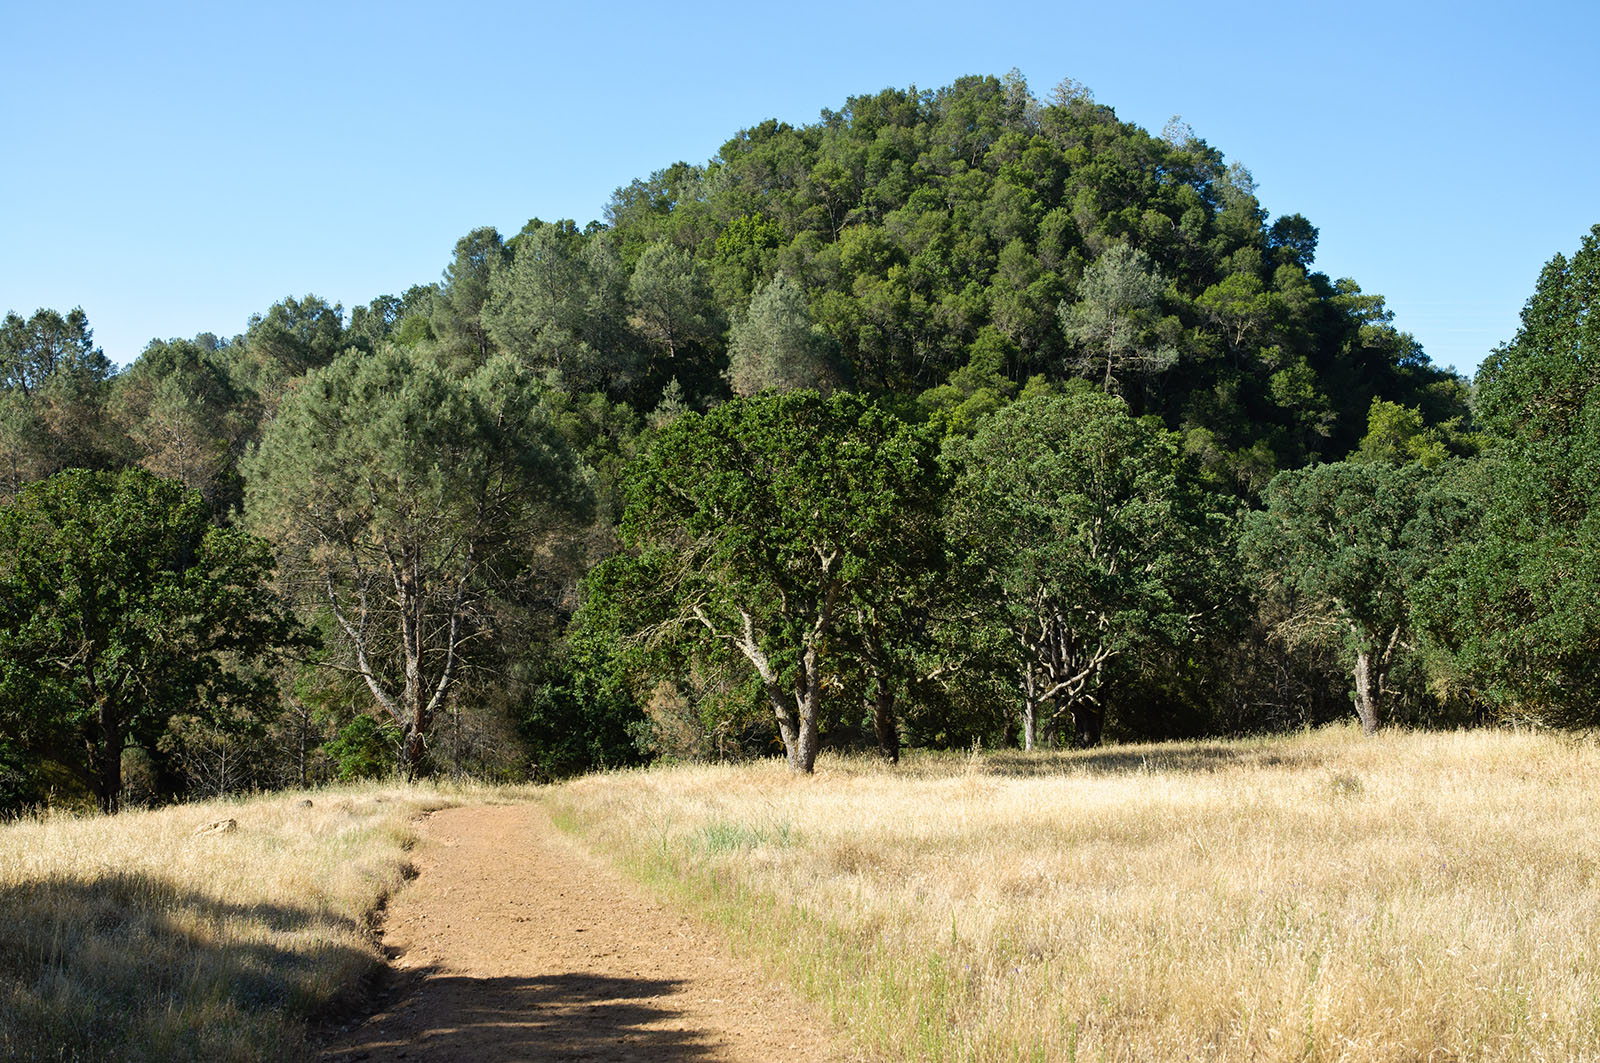 Volcanic dome in Perkins Canyon at Mount Diablo State Park